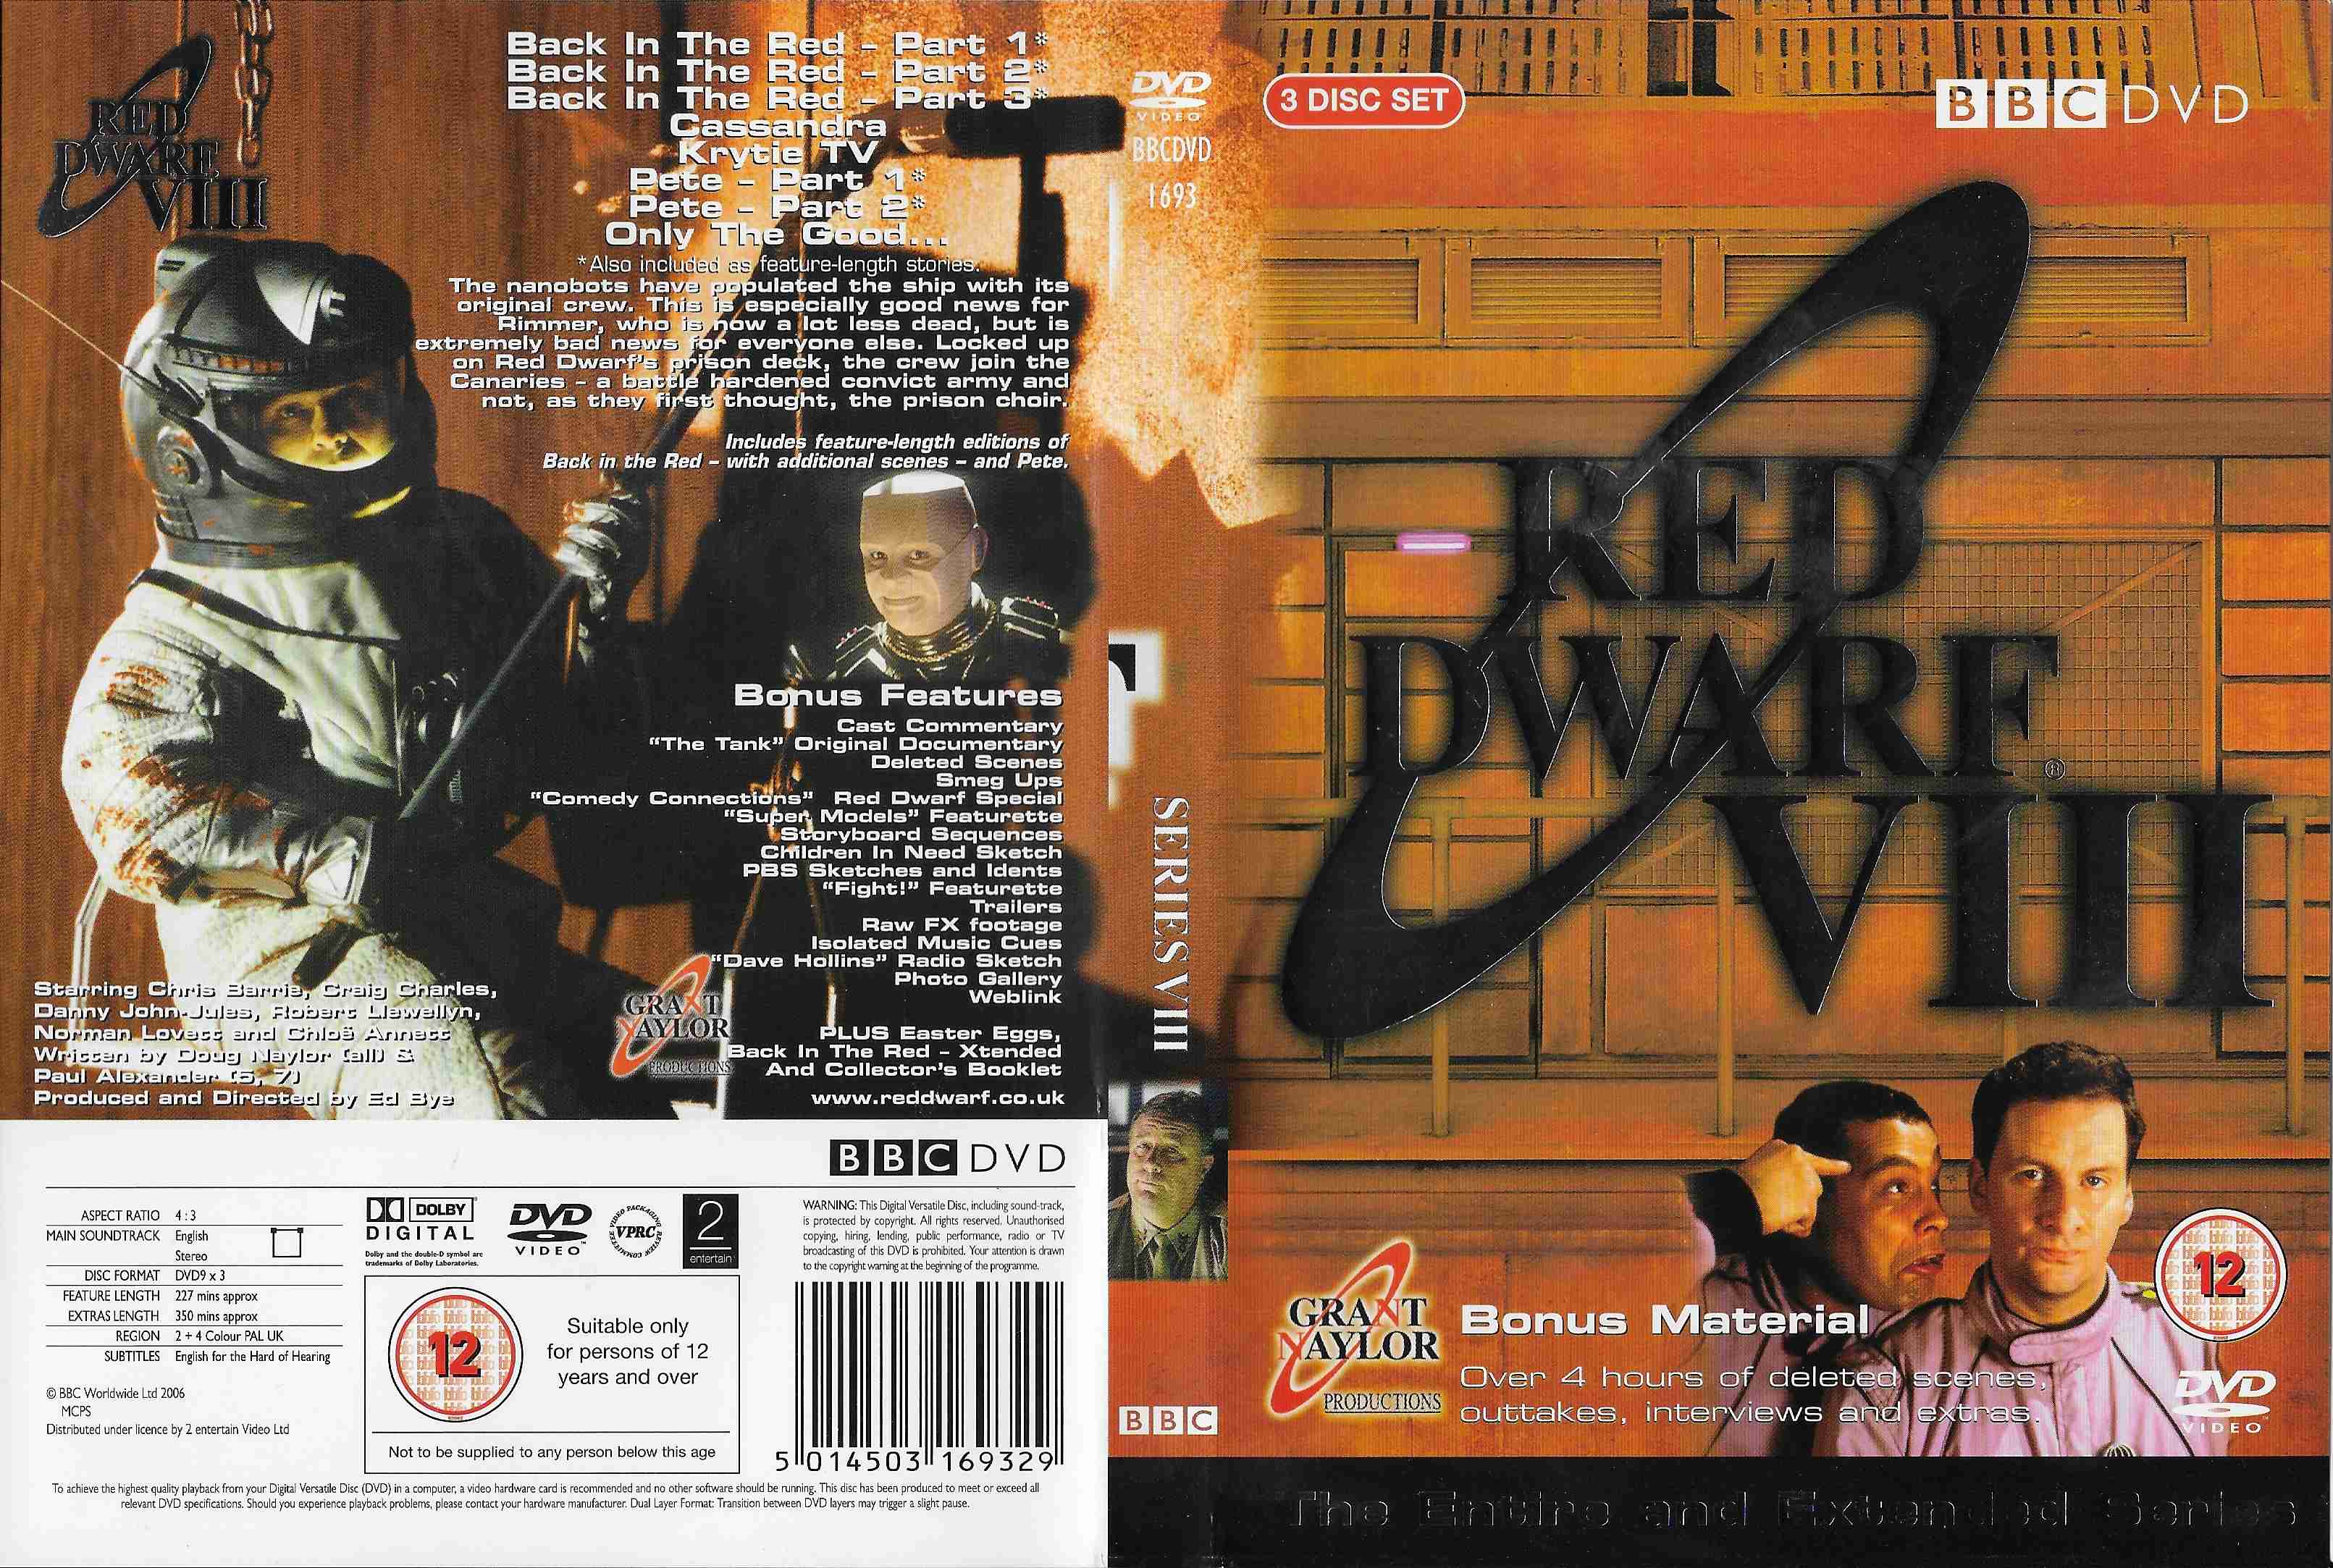 Picture of BBCDVD 1693 Red dwarf - Series VIII by artist Rob Grant / Doug Naylor from the BBC records and Tapes library